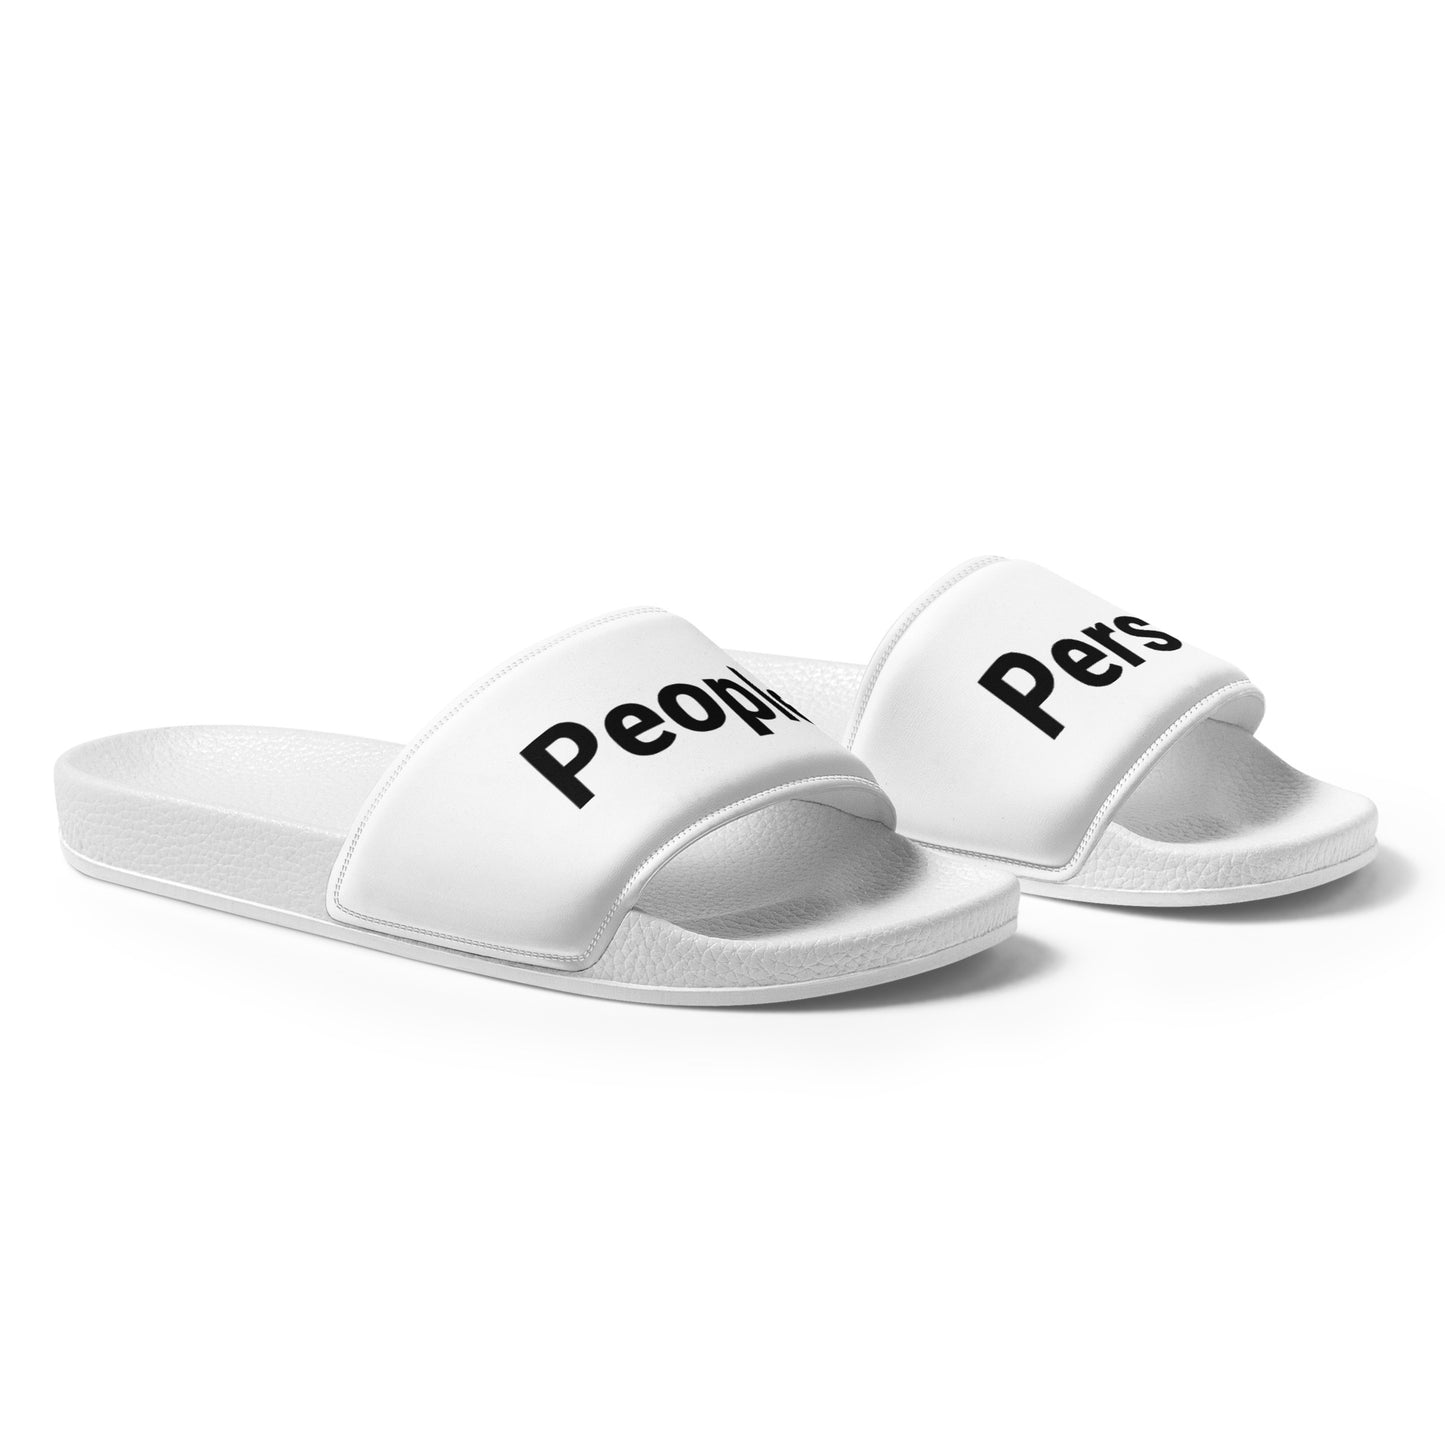 People Person Women's Slides